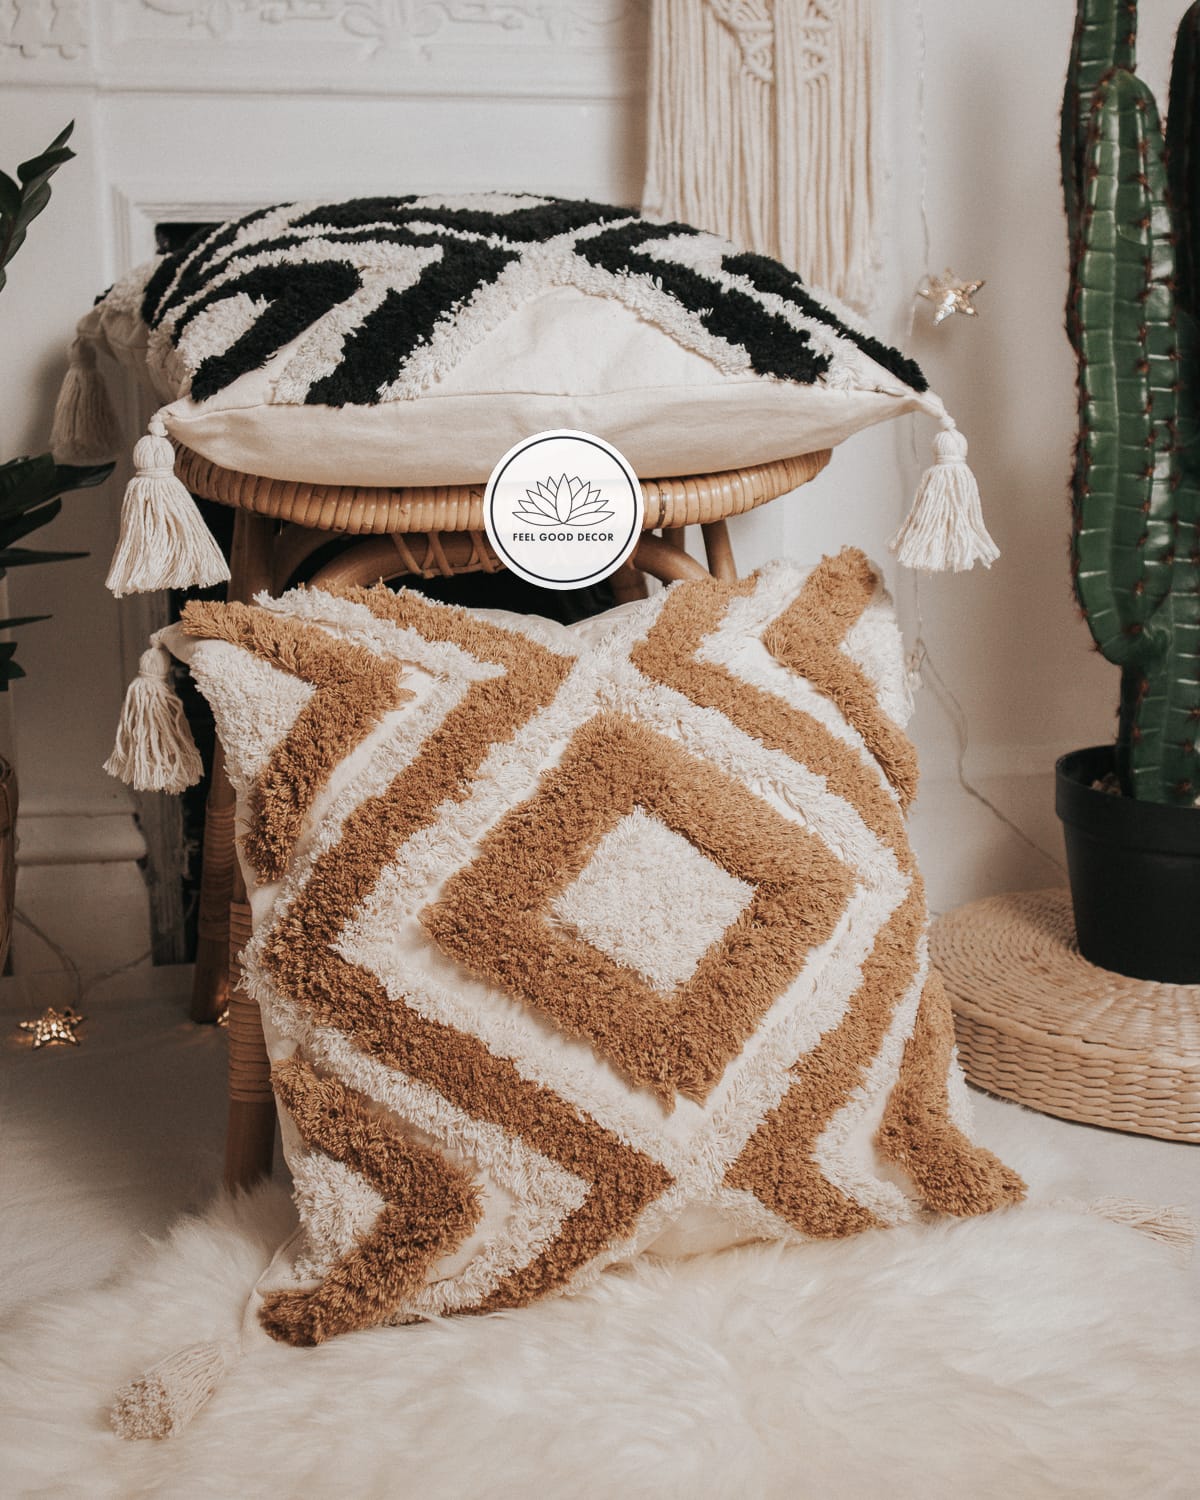 https://feelgooddecor.com/wp-content/uploads/2020/12/Mustard_Yellow_Bohemian_Throw_Pillow_Cushion_Cover_With_Tufted_Geometric_Patterns_Feel_Good_Decor-1.jpg